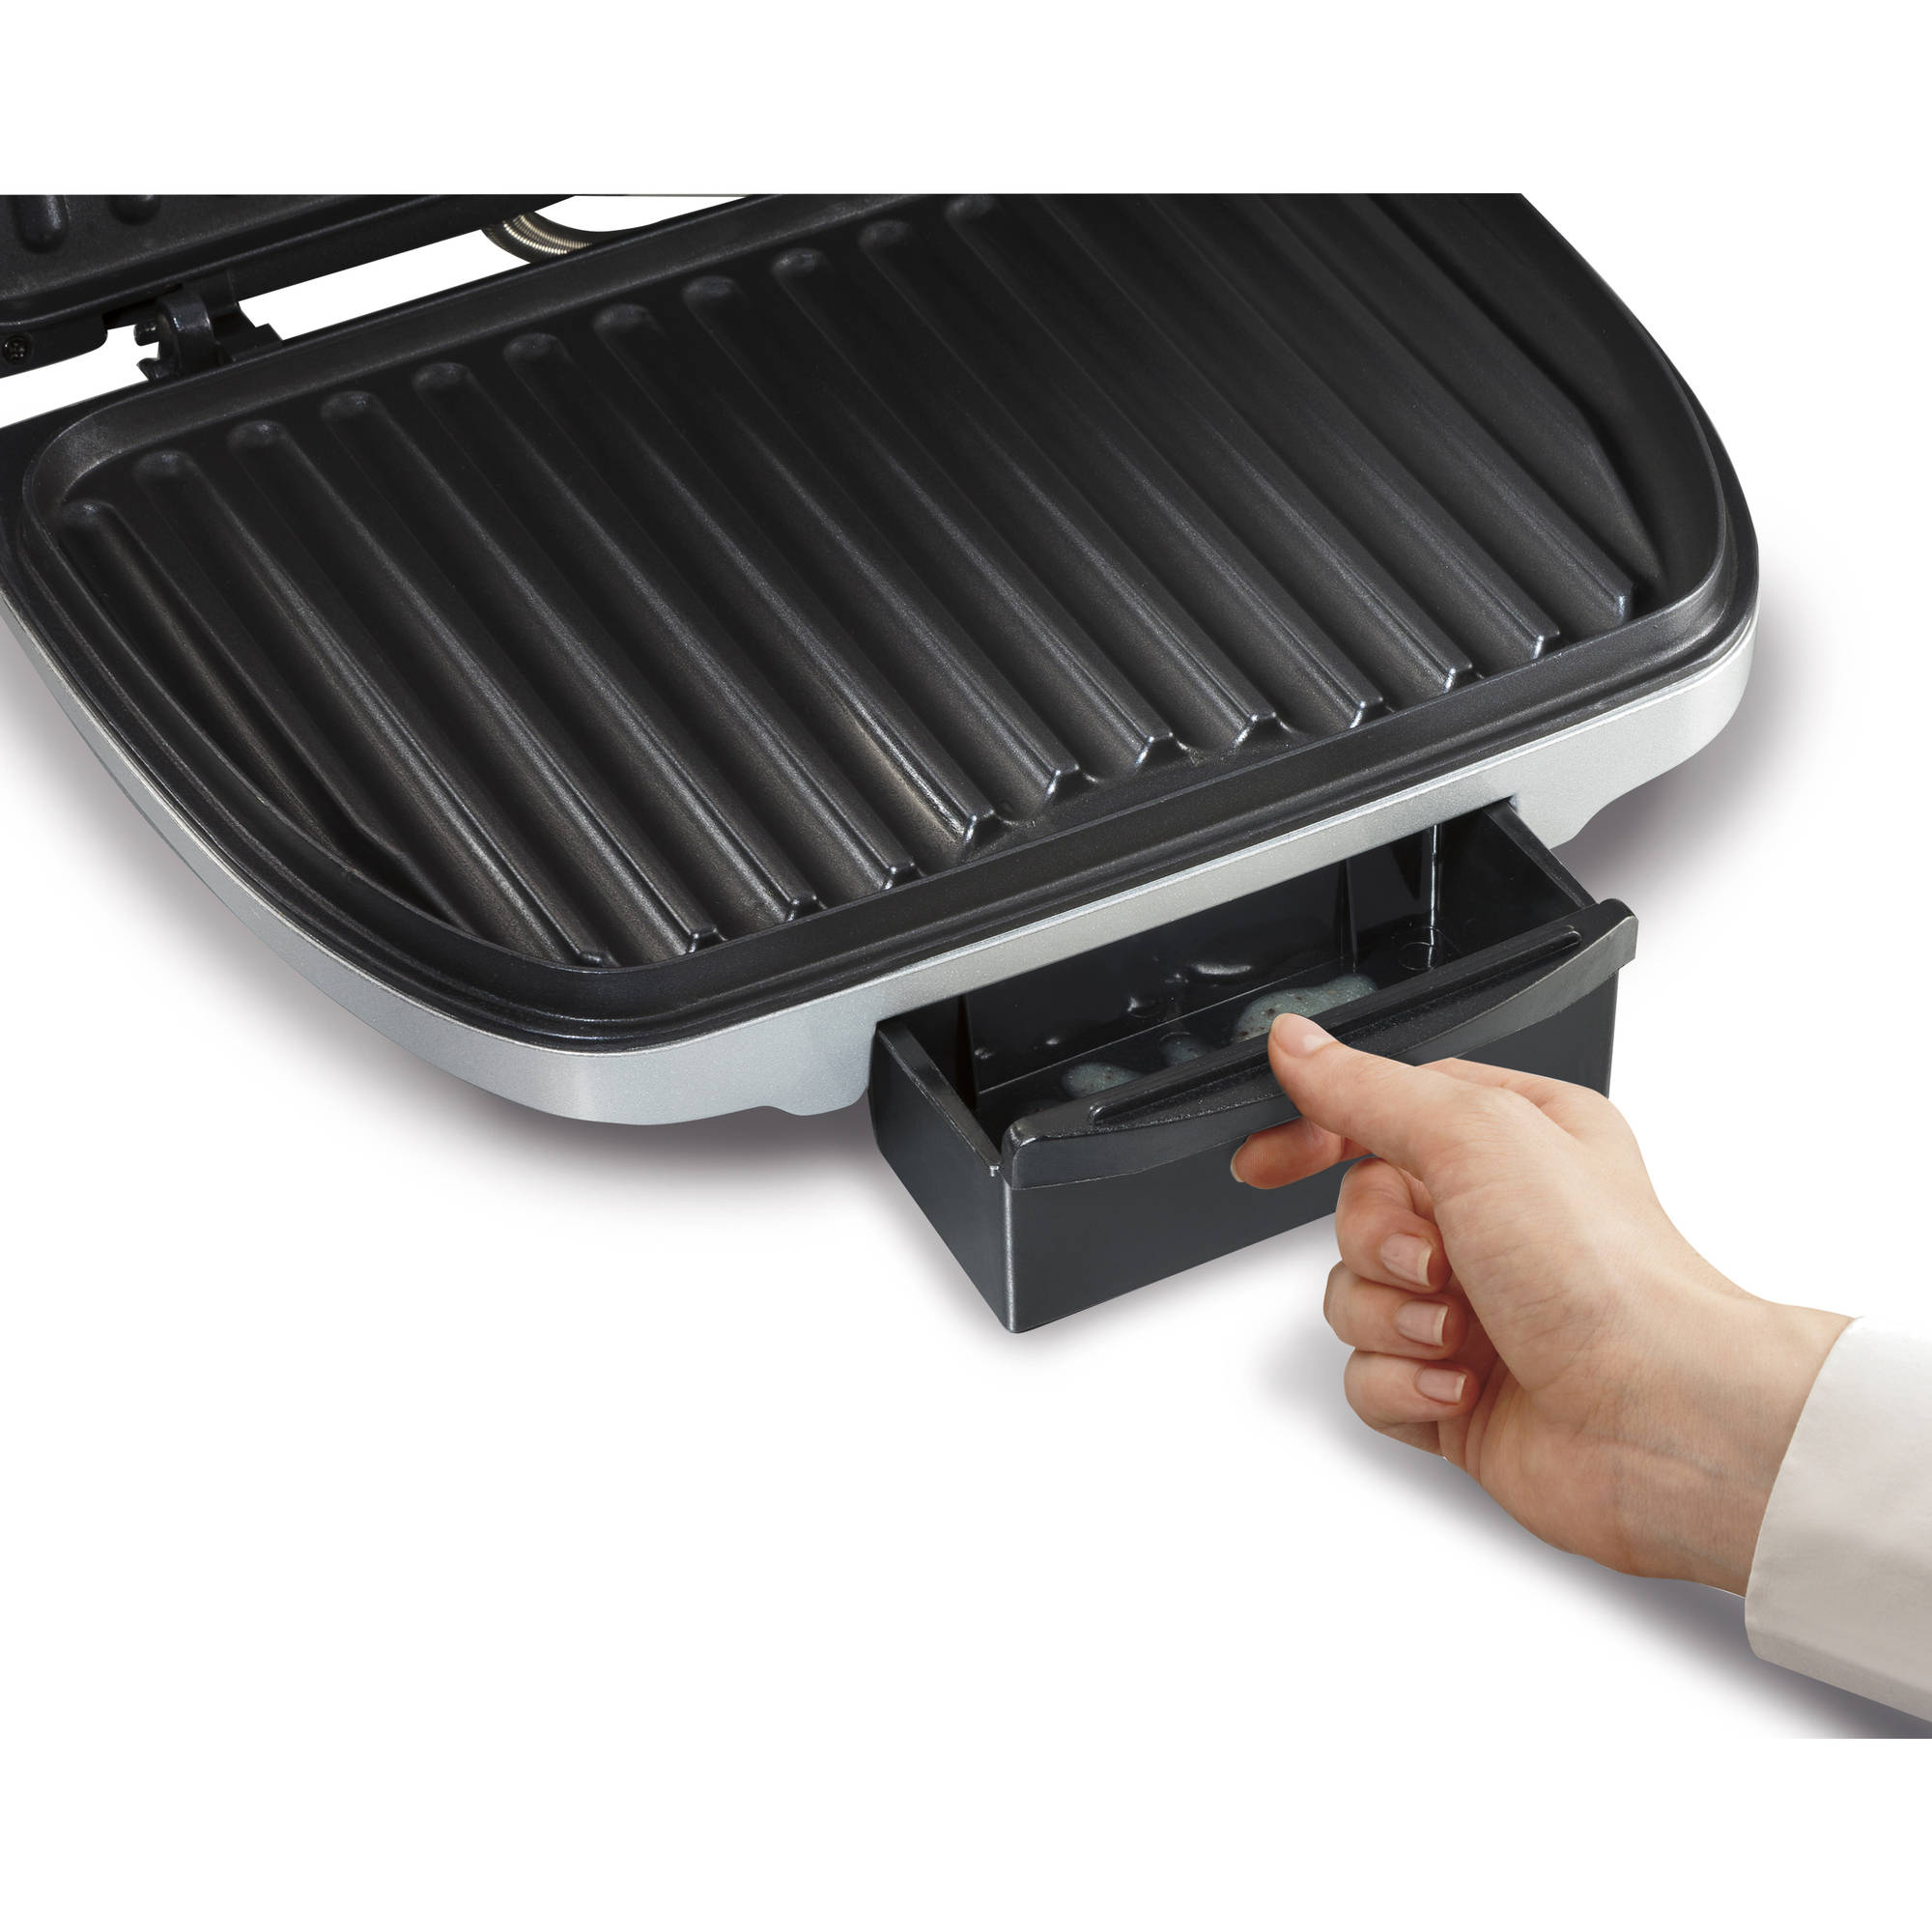 Hamilton Beach Electric Indoor Grill, 6-Serving, Large 90 sq.in. Nonstick Easy Clean Plates, Floating Hinge for Thicker Foods, 1200W, Stainless Steel, 25371 - image 2 of 5